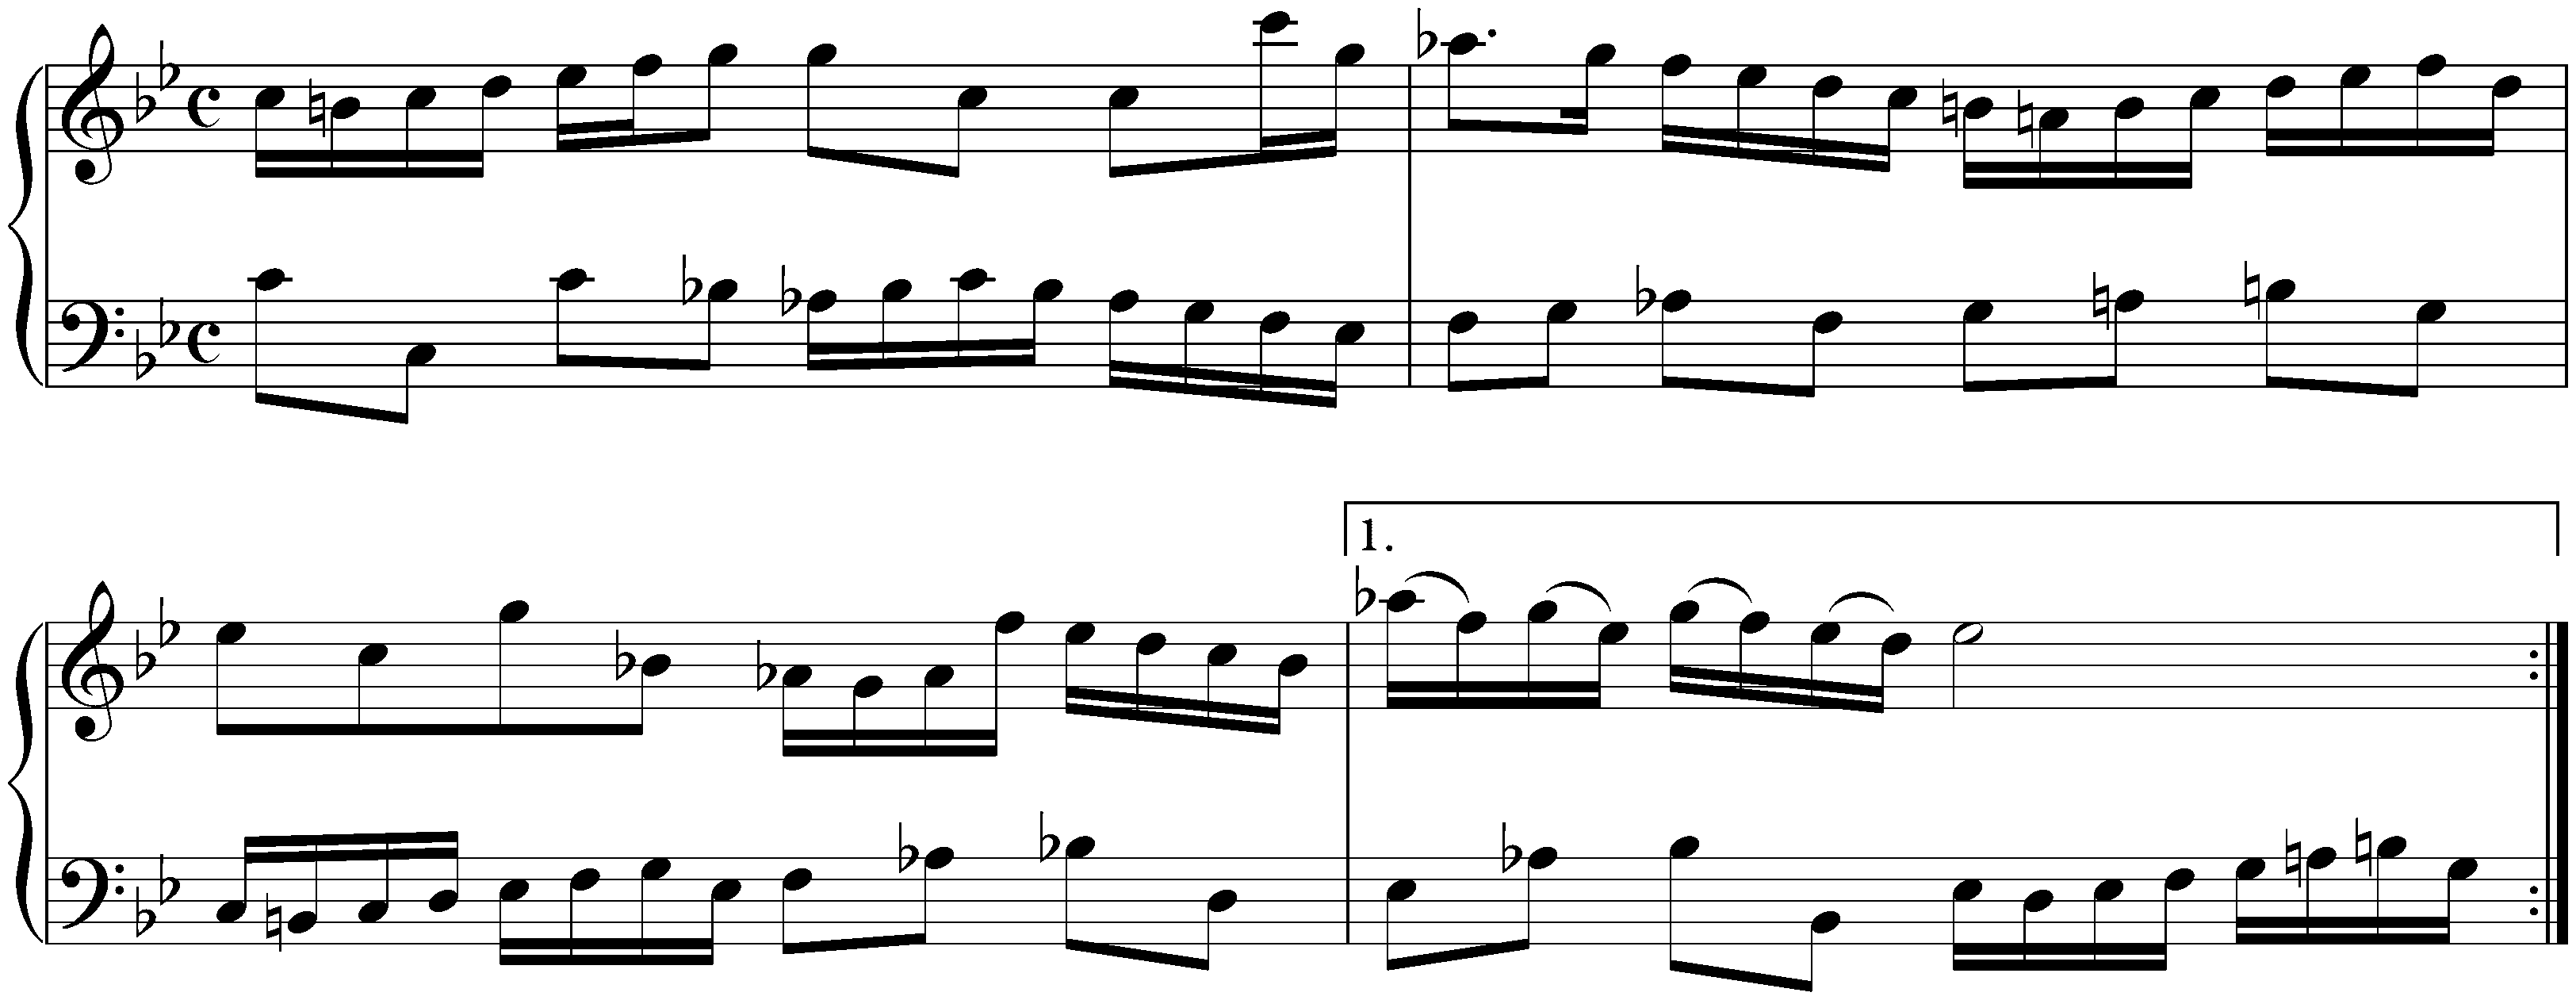 French Suite no. 2 in C minor, BWV 813; 4. Air